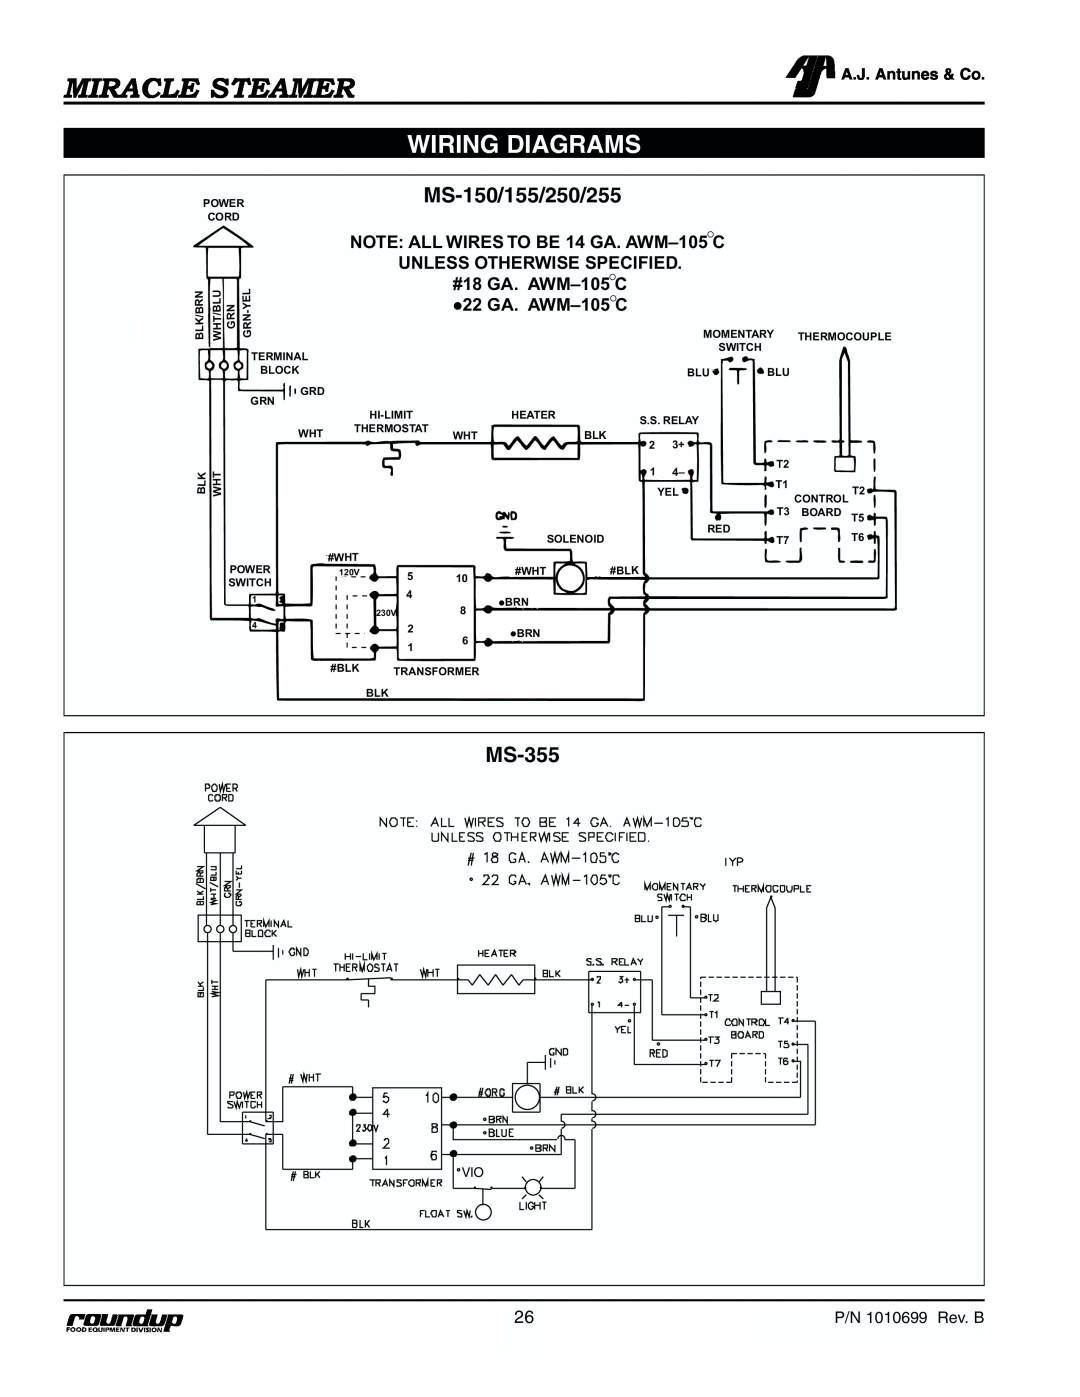 Antunes, AJ MS-250/255 Wiring Diagrams, Miracle Steamer, NOTE ALL WIRES TO BE 14 GA. AWM-105 C, Unless Otherwise Specified 